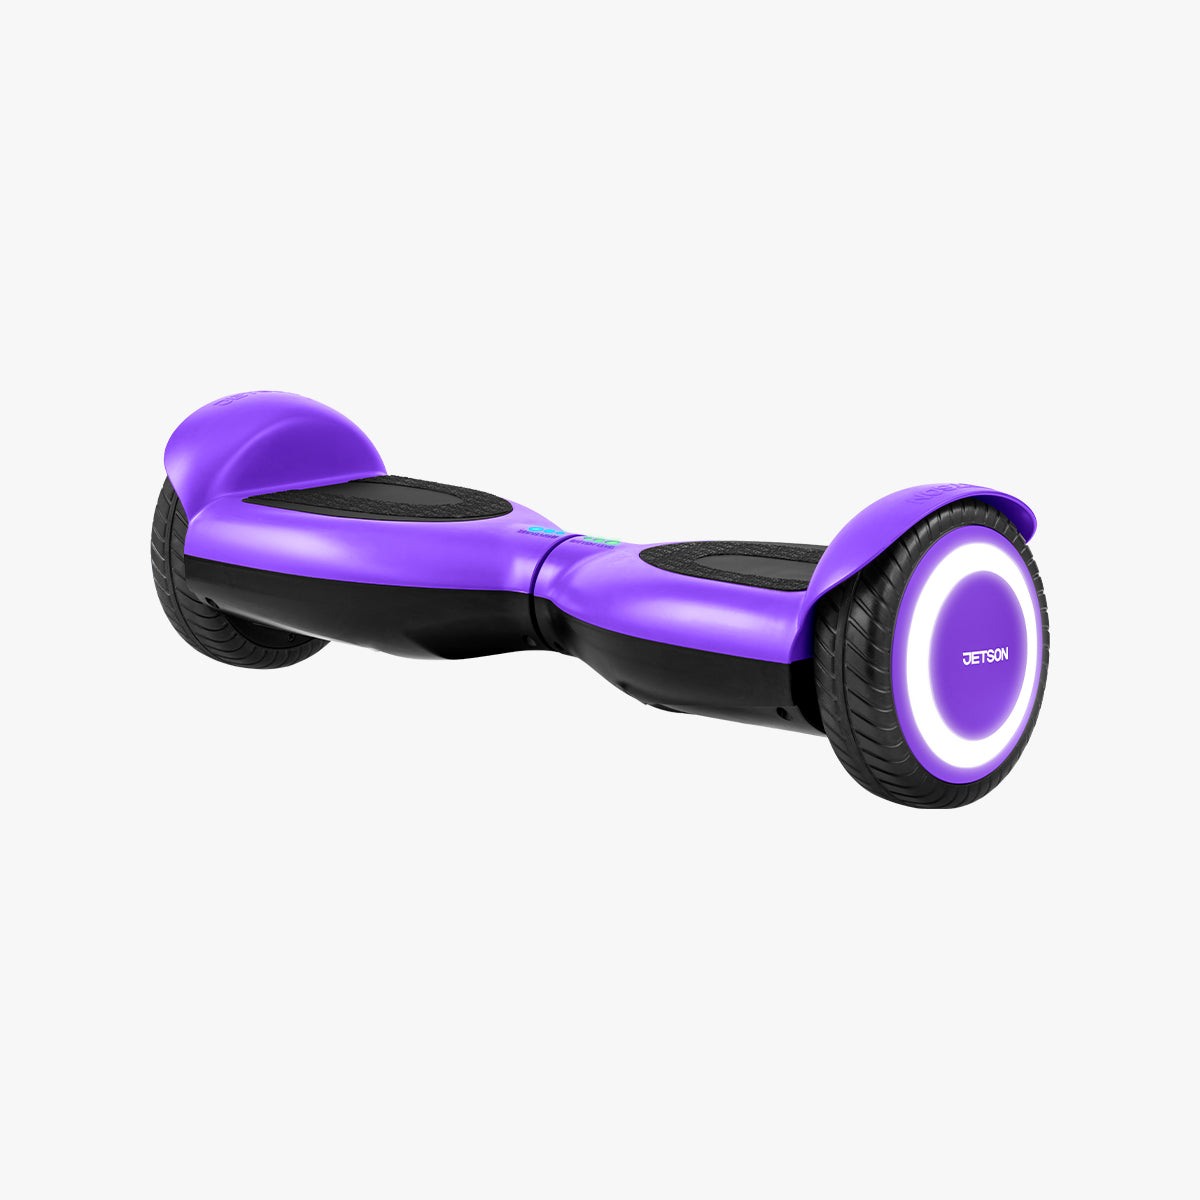 view of the purple Prism hoverboard angled to the left